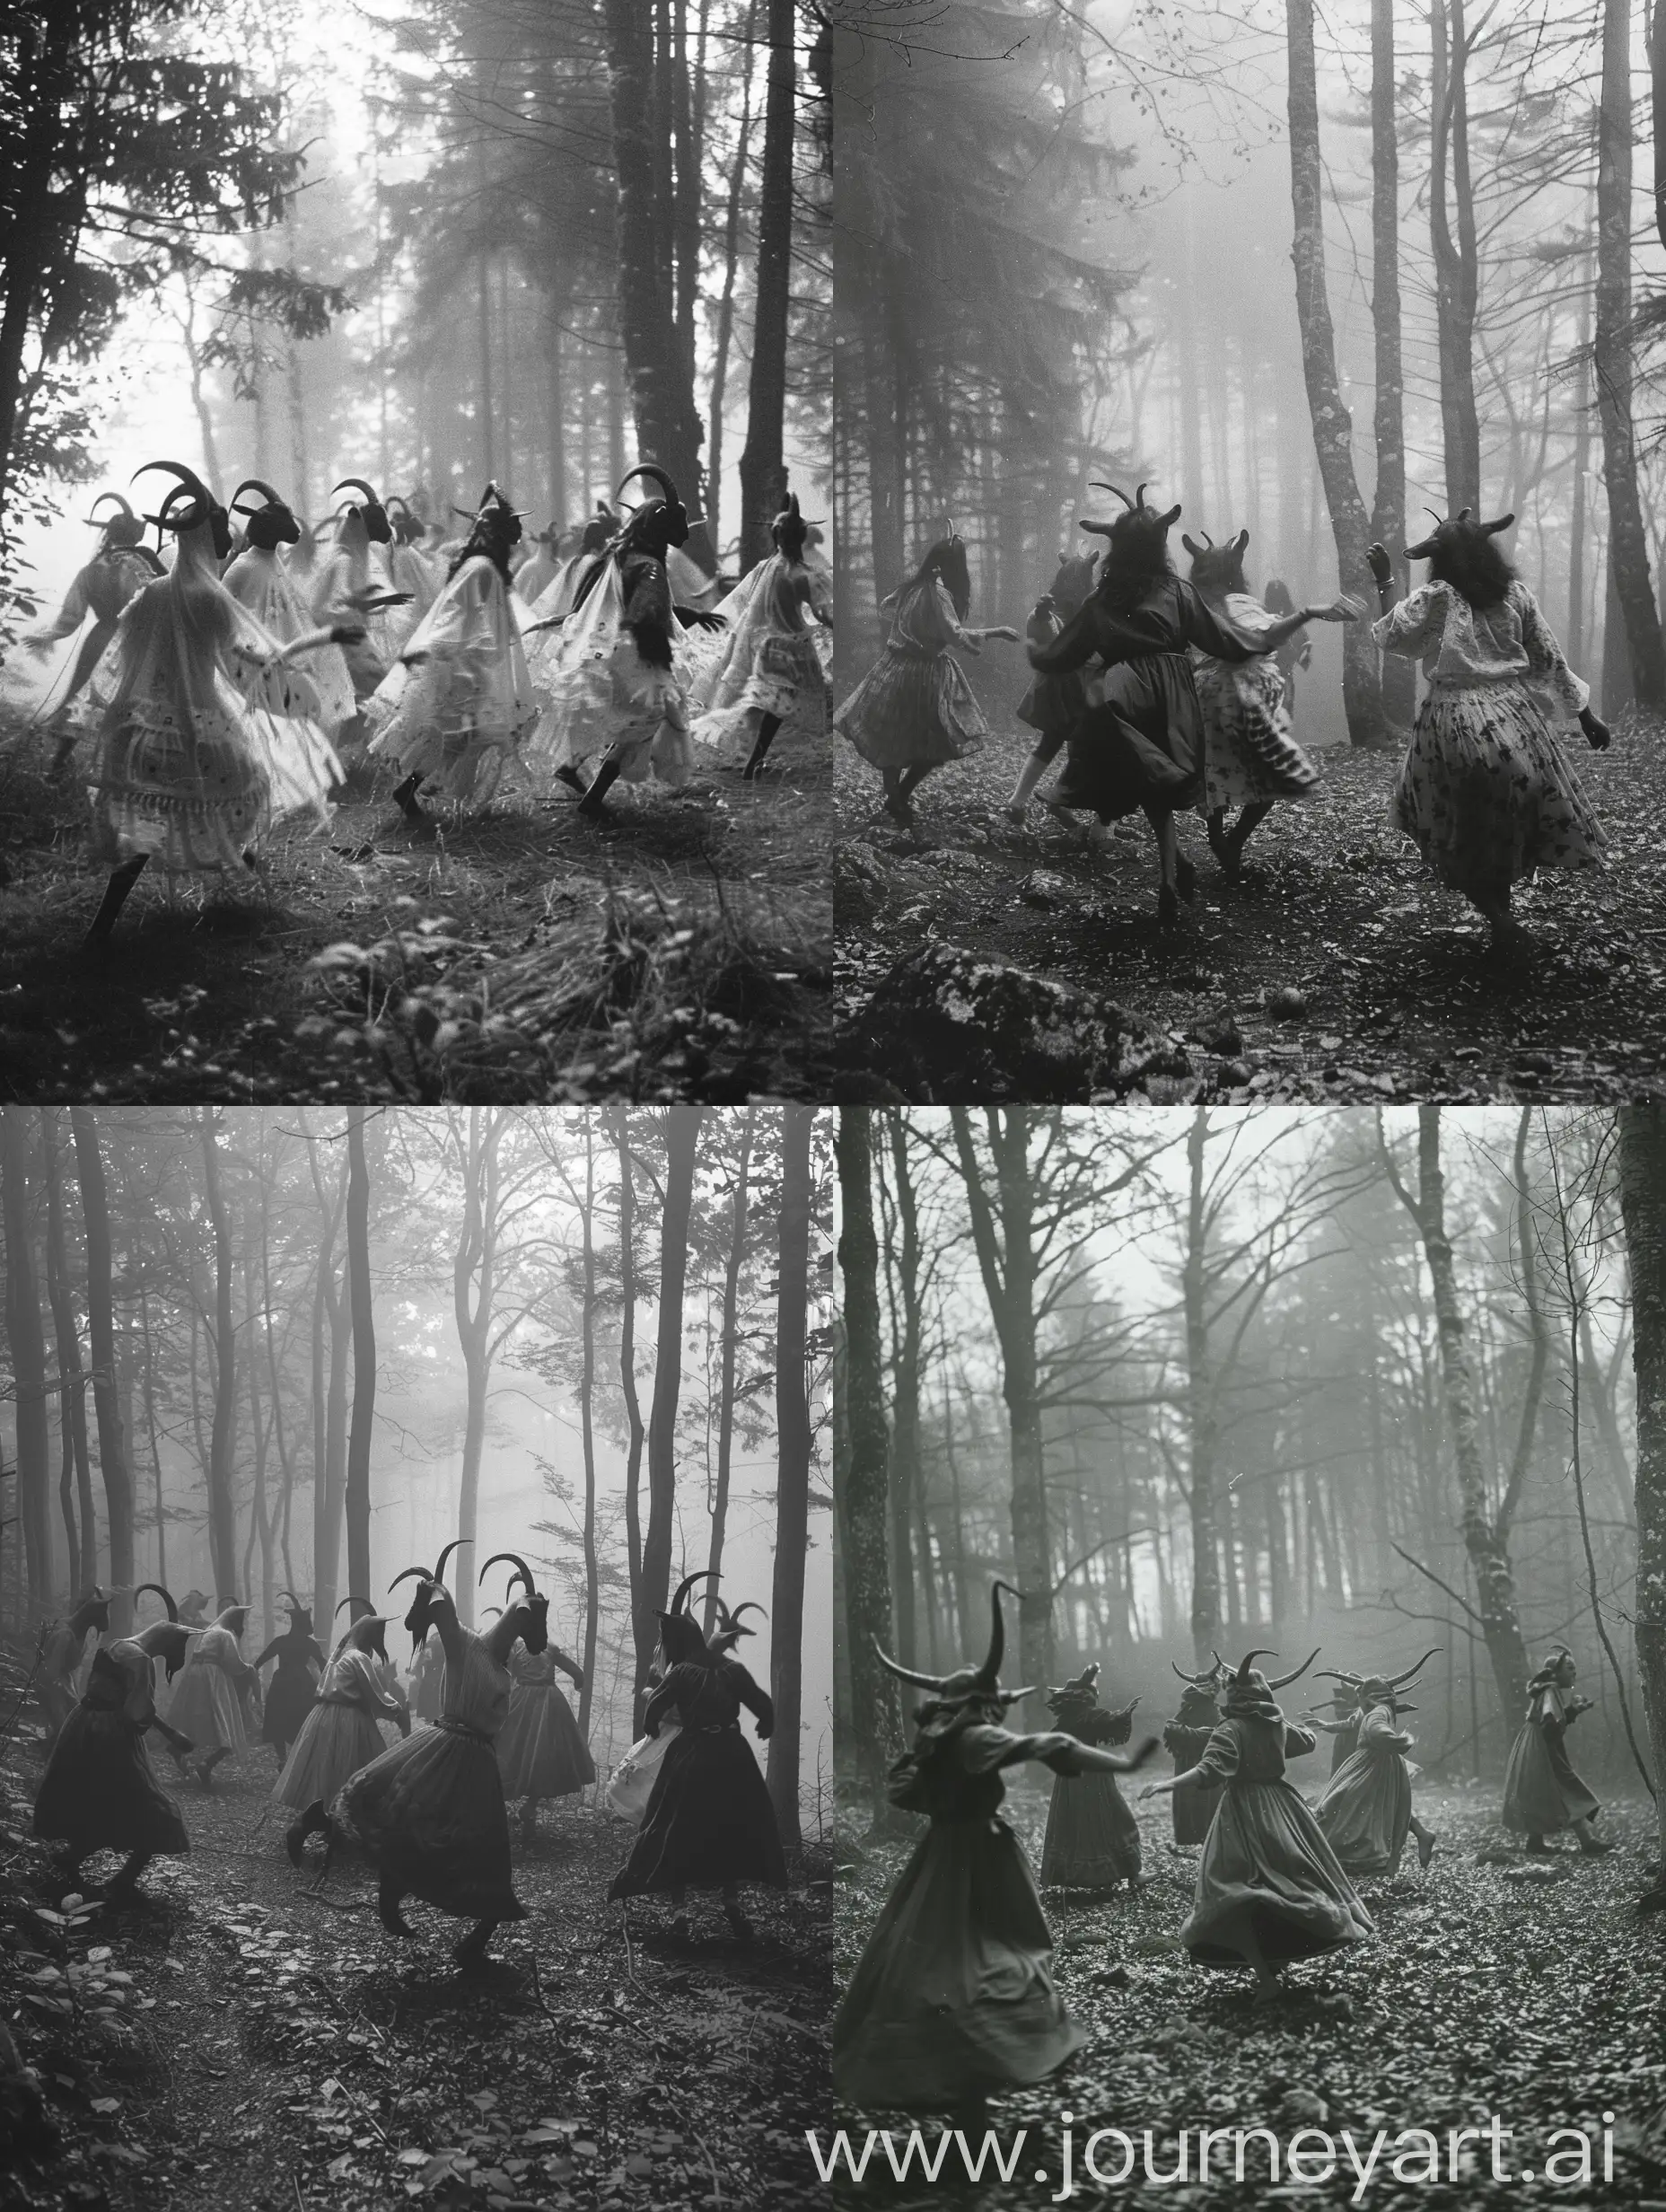 Goat witches dancing in the forest, grayscale, cursed proverbs, eerie foggy forest, attention to detail, folk horror, occult core, expired 35mm film, Ju Dha Krist 